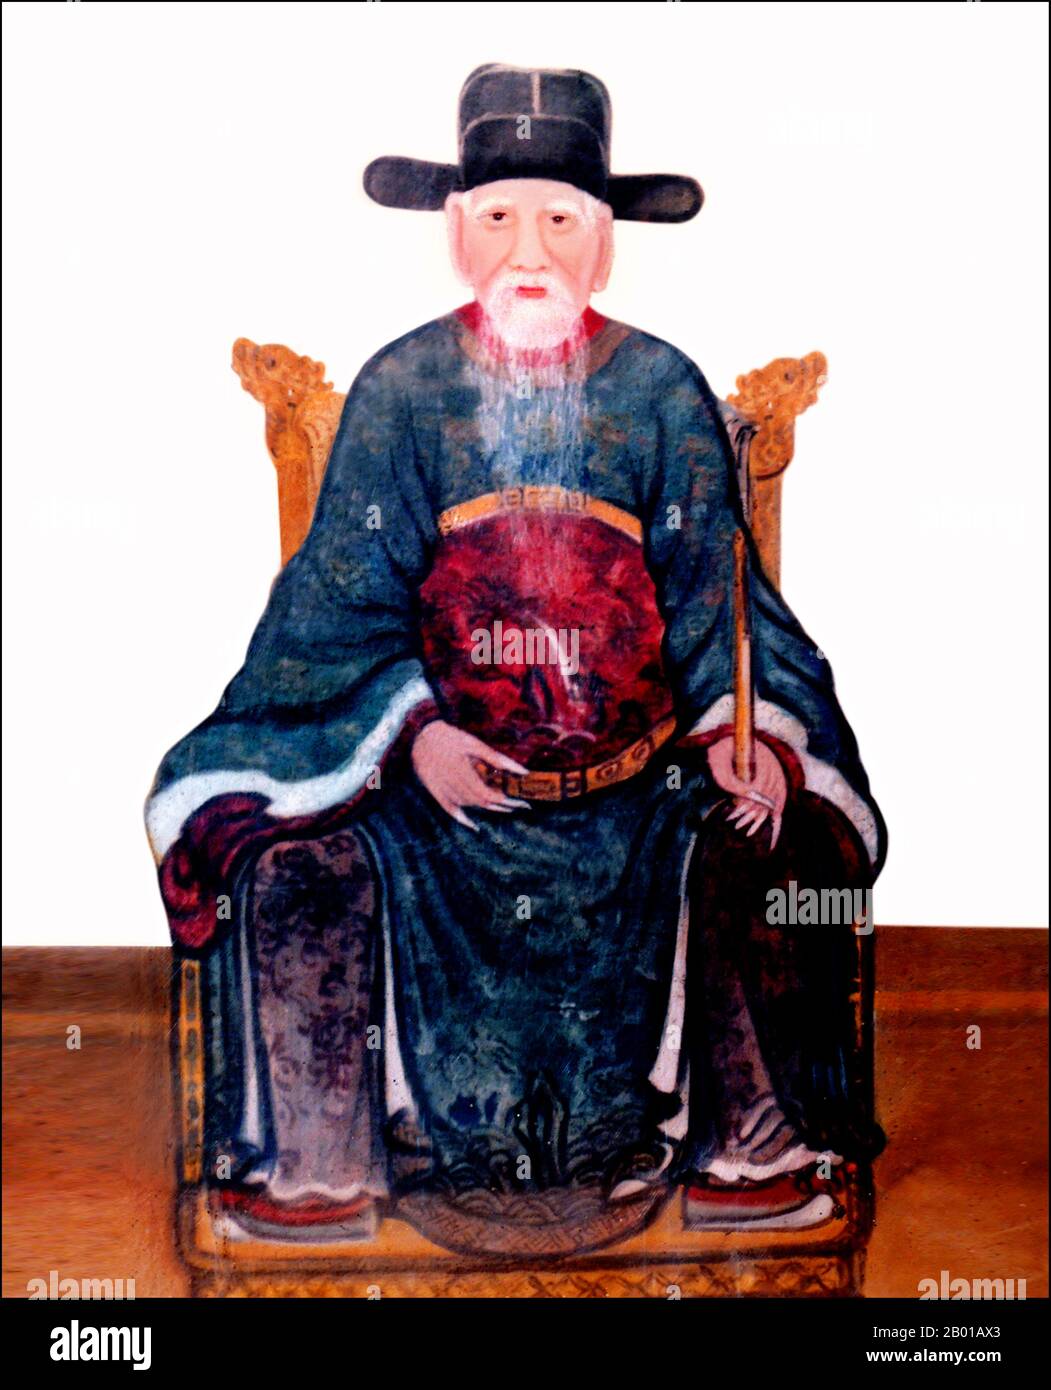 Vietnam: Nguyen Trai (1380-1442), poet, patriot and adviser to Emperor Le Loi (r.1428-1433), 16th century painting.  Nguyễn Trãi, also known under his pen name Ức Trai, was an illustrious Vietnamese Confucian scholar, a noted poet, a skilled politician and a master tactician. He was at times attributed with being capable of almost miraculous or mythical deeds in his designated capacity as a close friend and principal advisor of Lê Lợi, Vietnam's hero-king, who fought to free the country from Chinese rule. Stock Photo